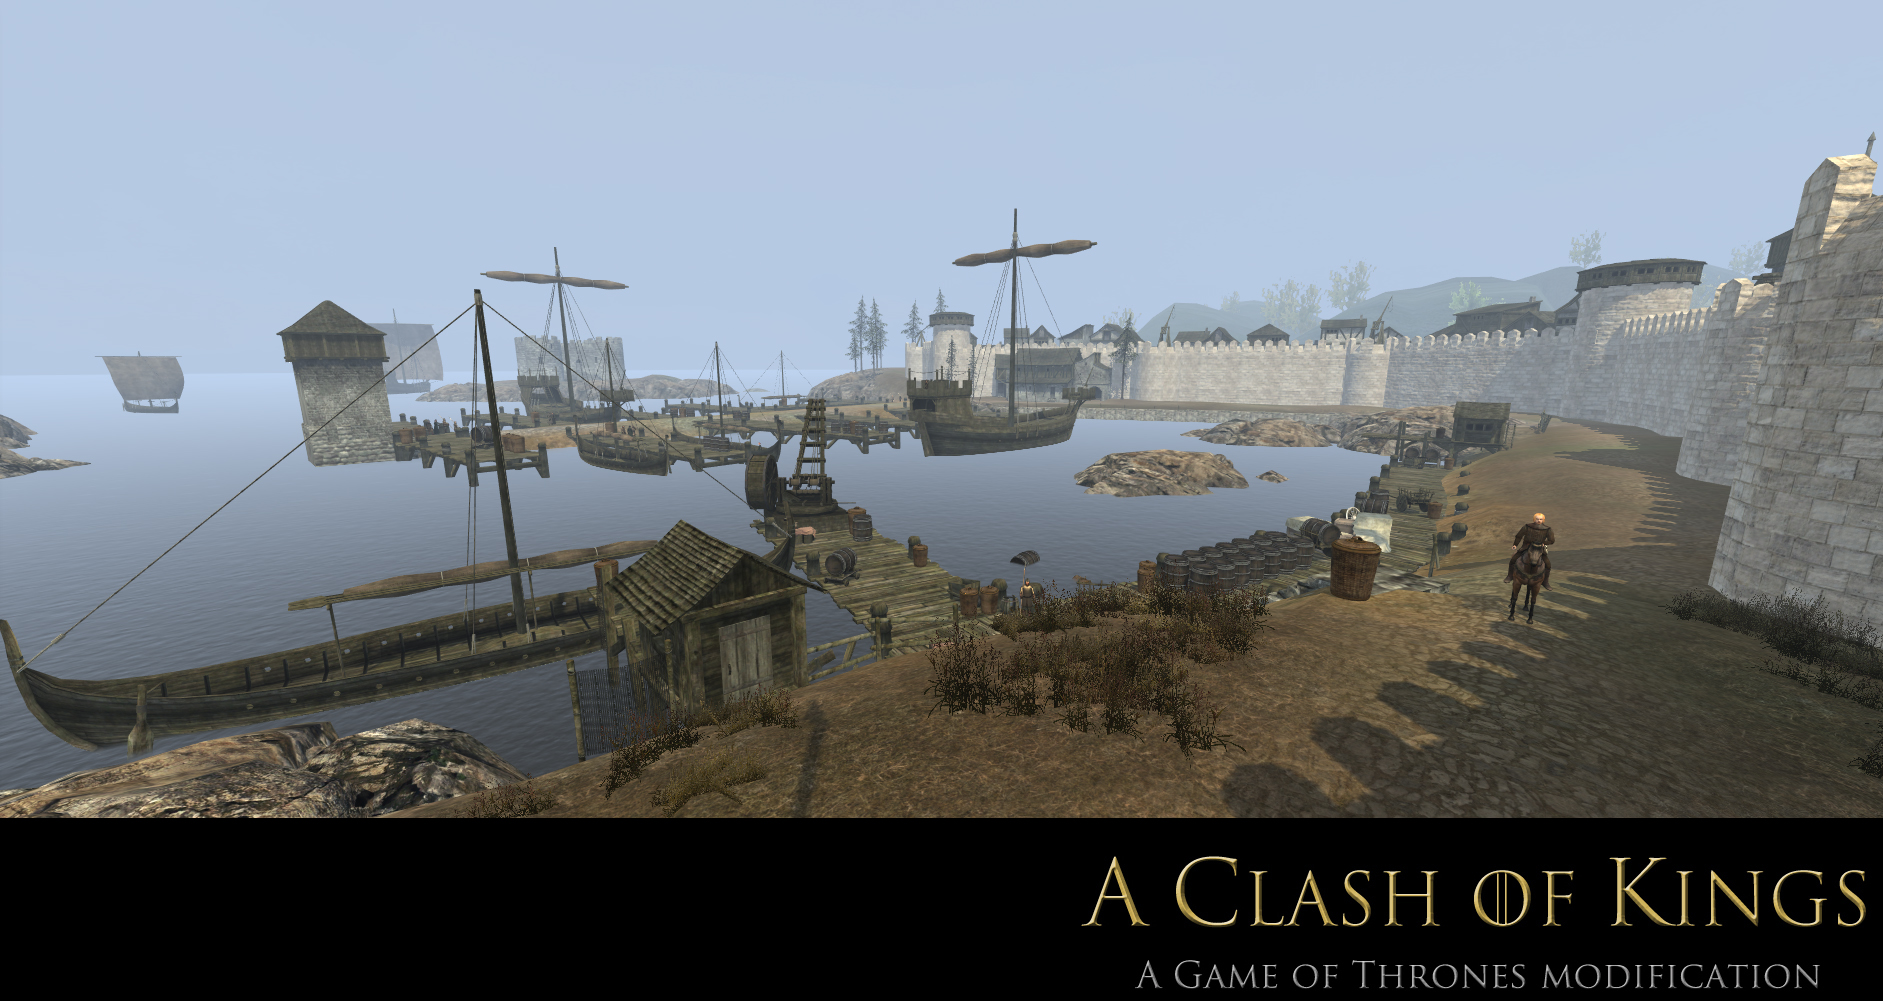 Clash of Kings mod; spoilers for A Storm of Swords/Game of Thrones